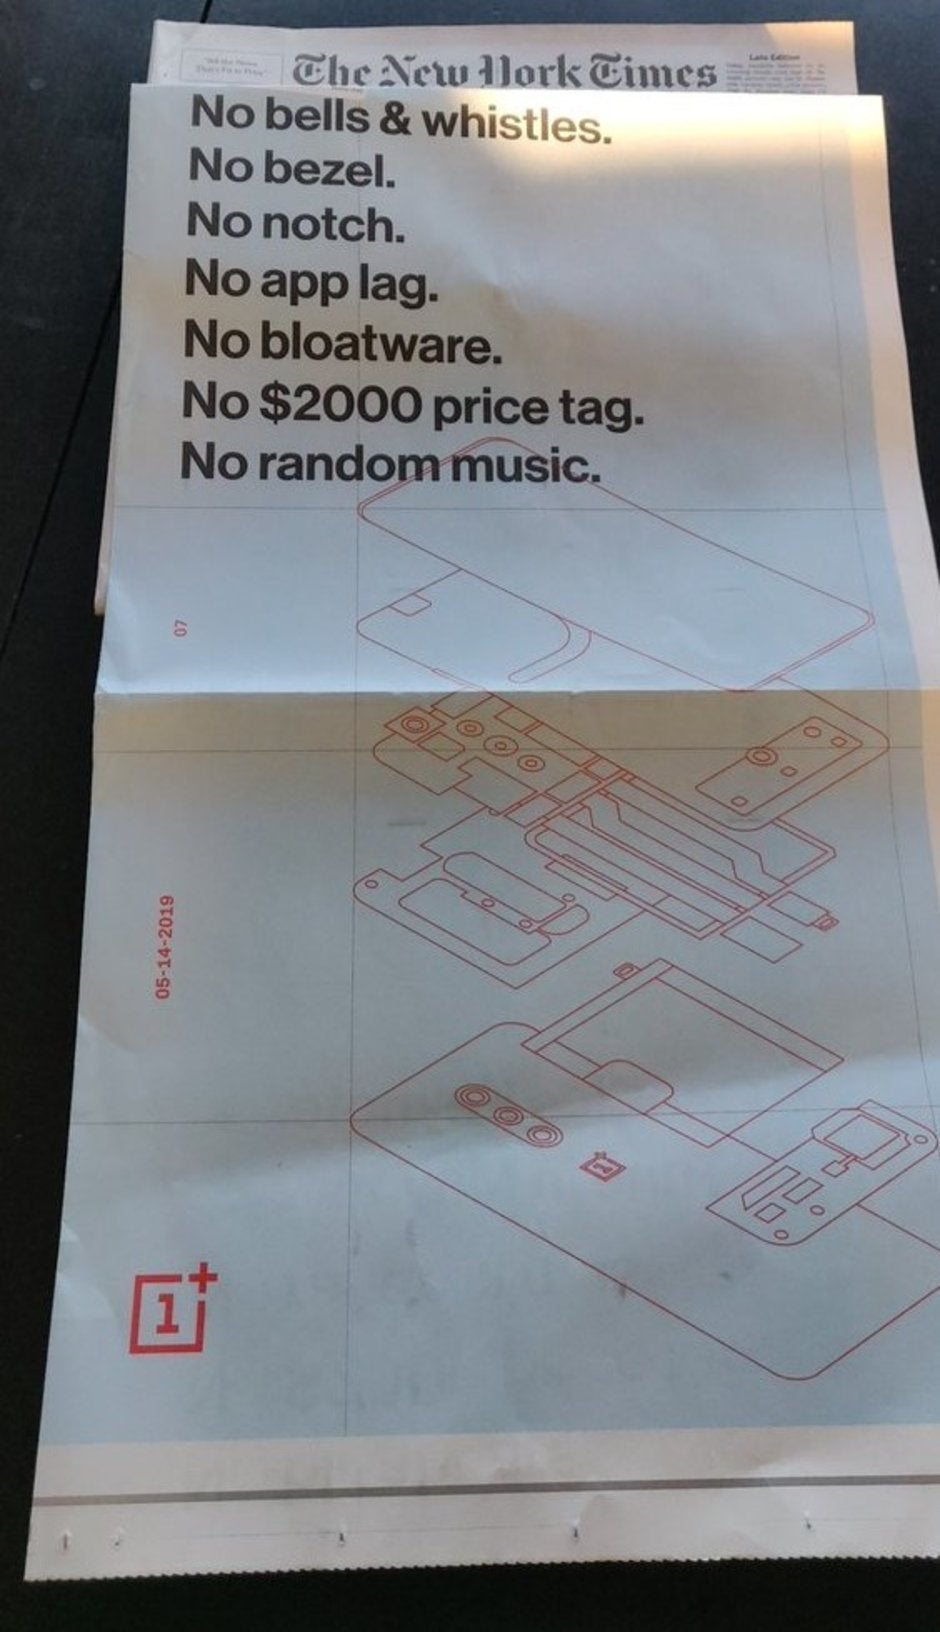 OnePlus 7 Pro newspaper ad confirms "no notch," teases other features